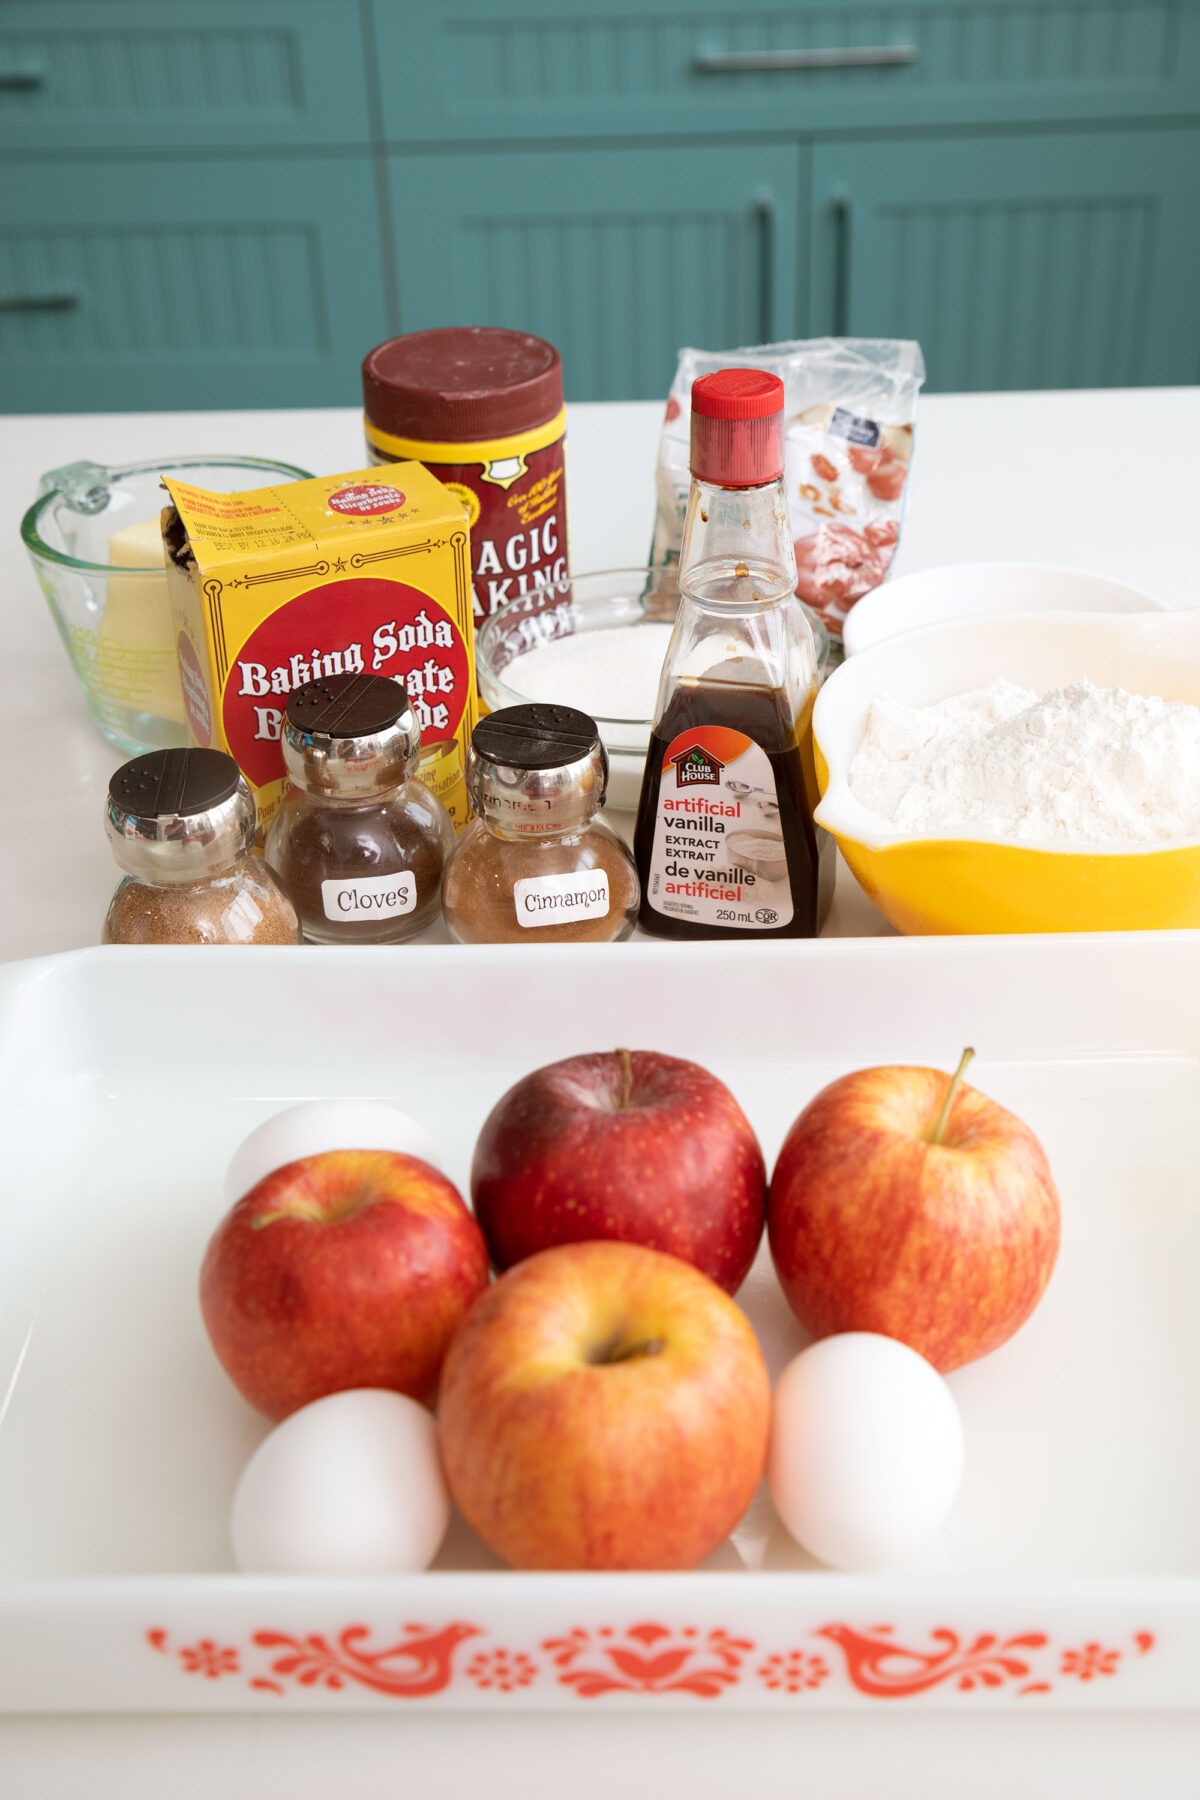 ingredients for apple cake